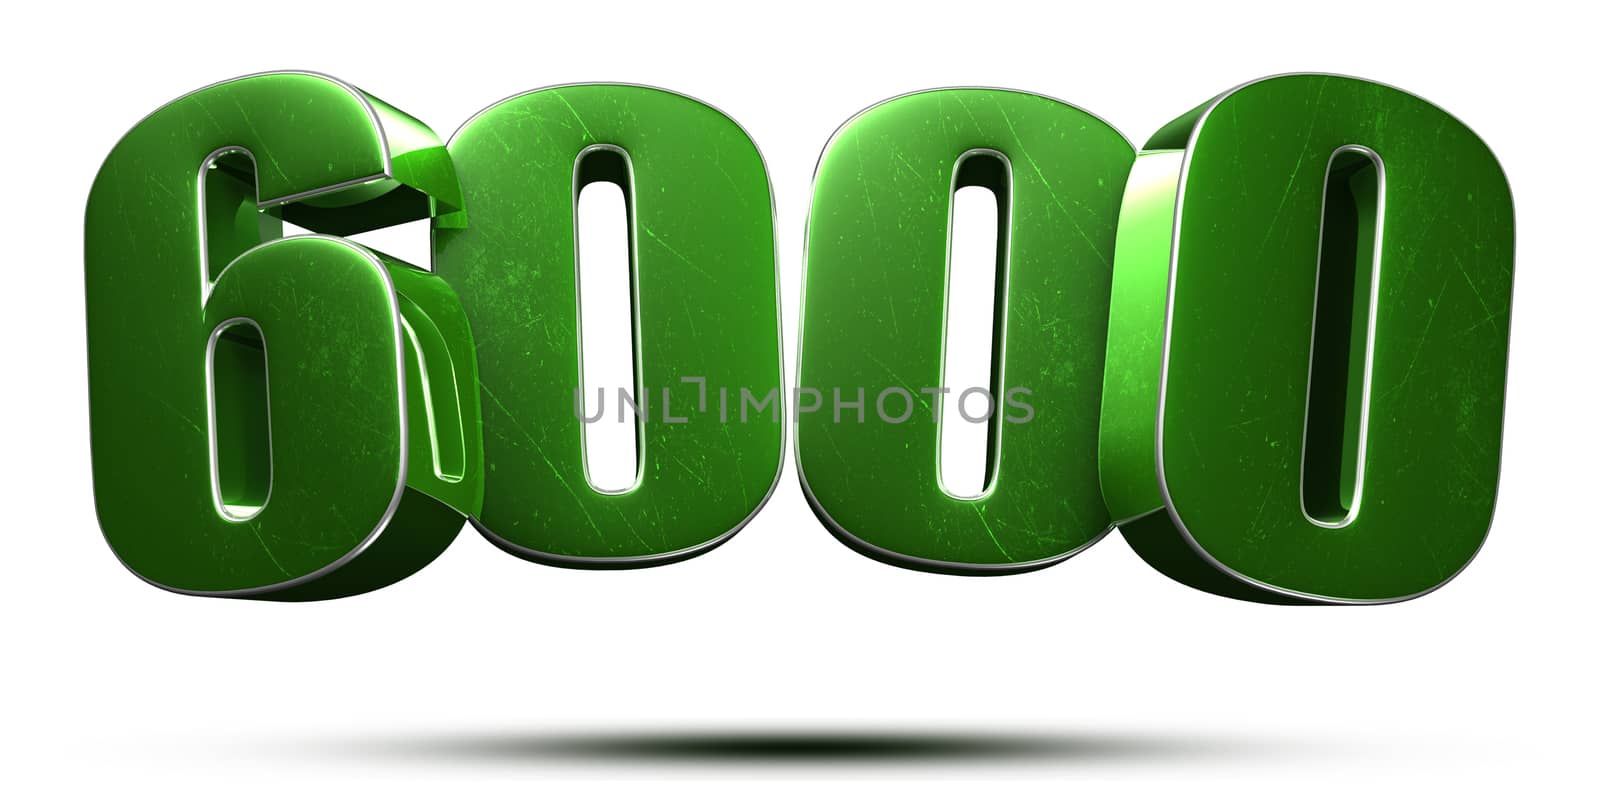 6000 3d numbers green on white background.